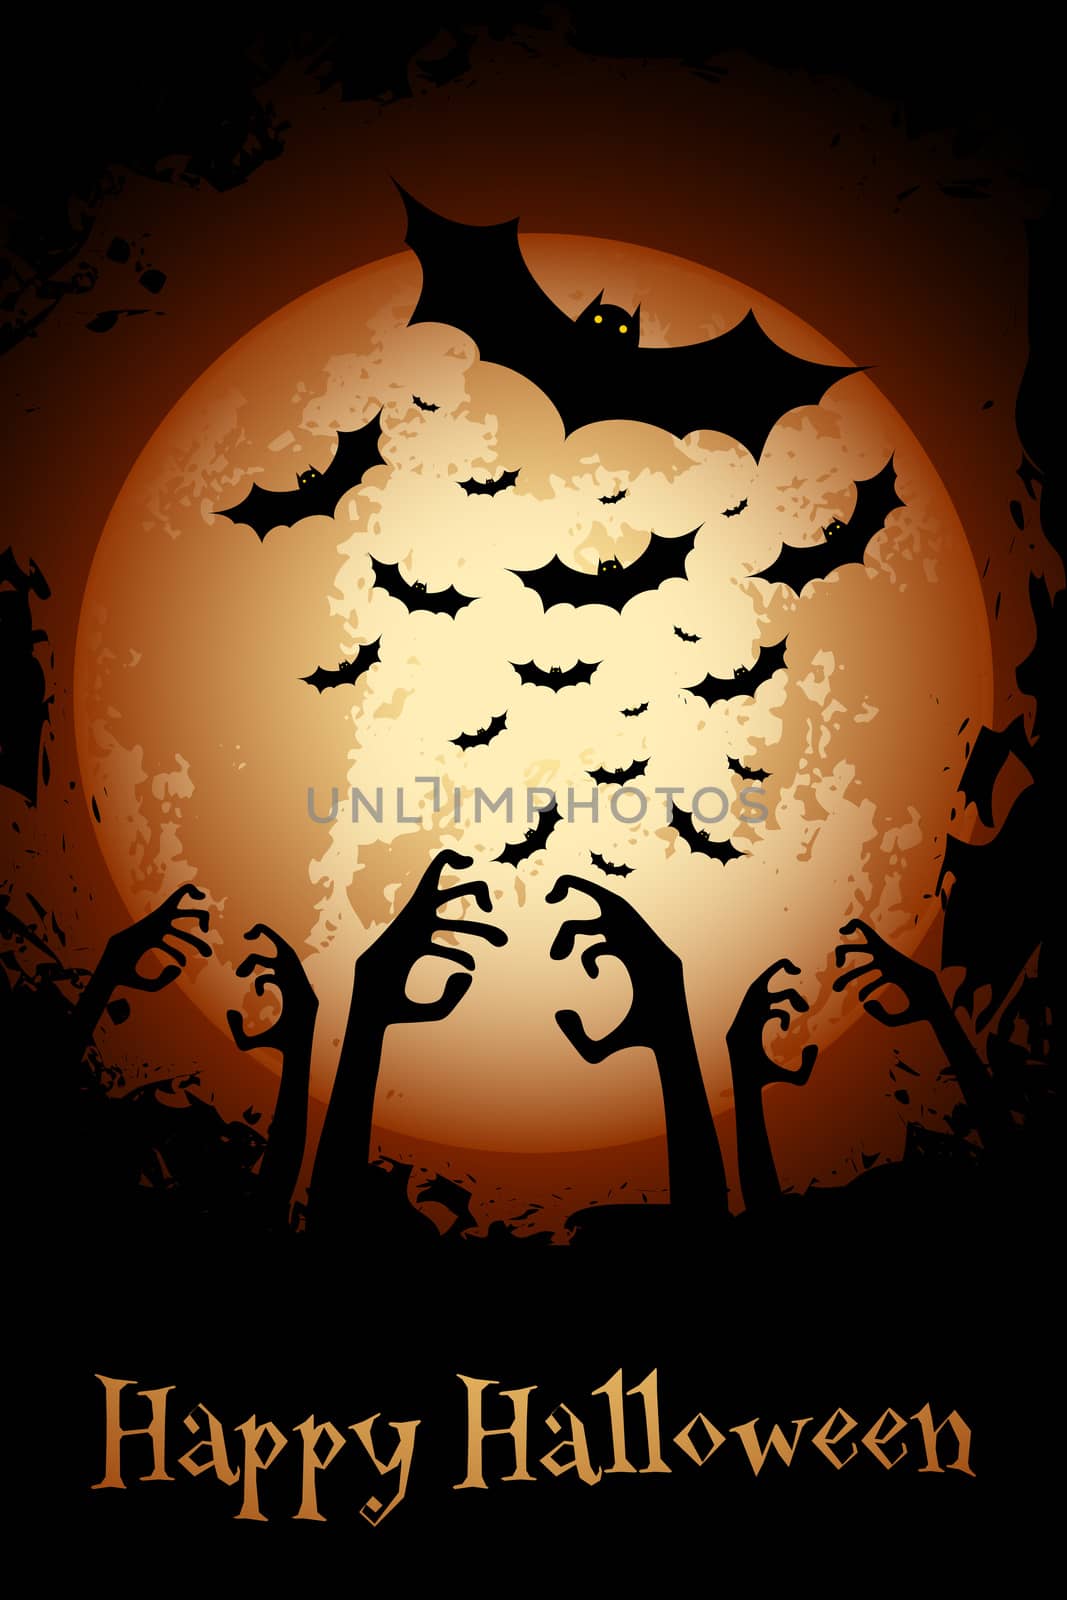 Halloween Poster. Grungy Background. by WaD